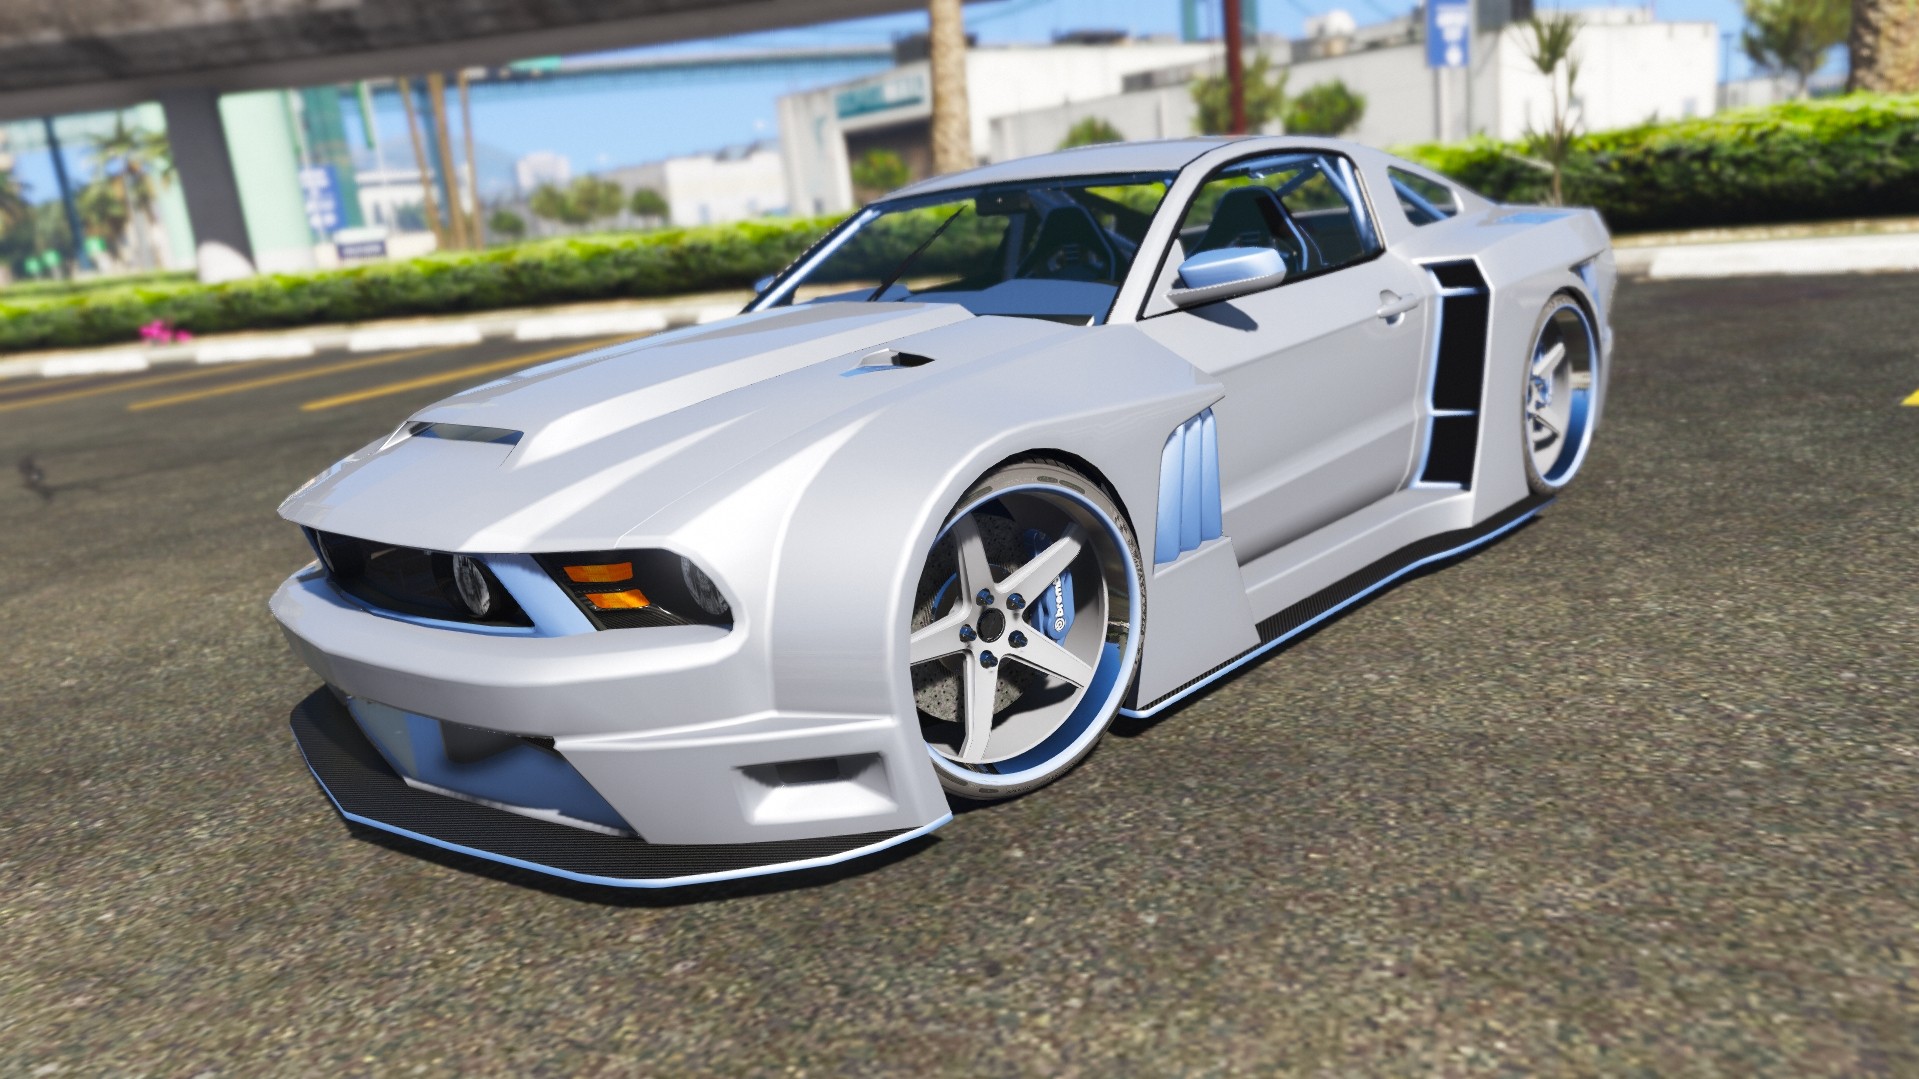 Ford Mustang GT Circuit Spec 2011